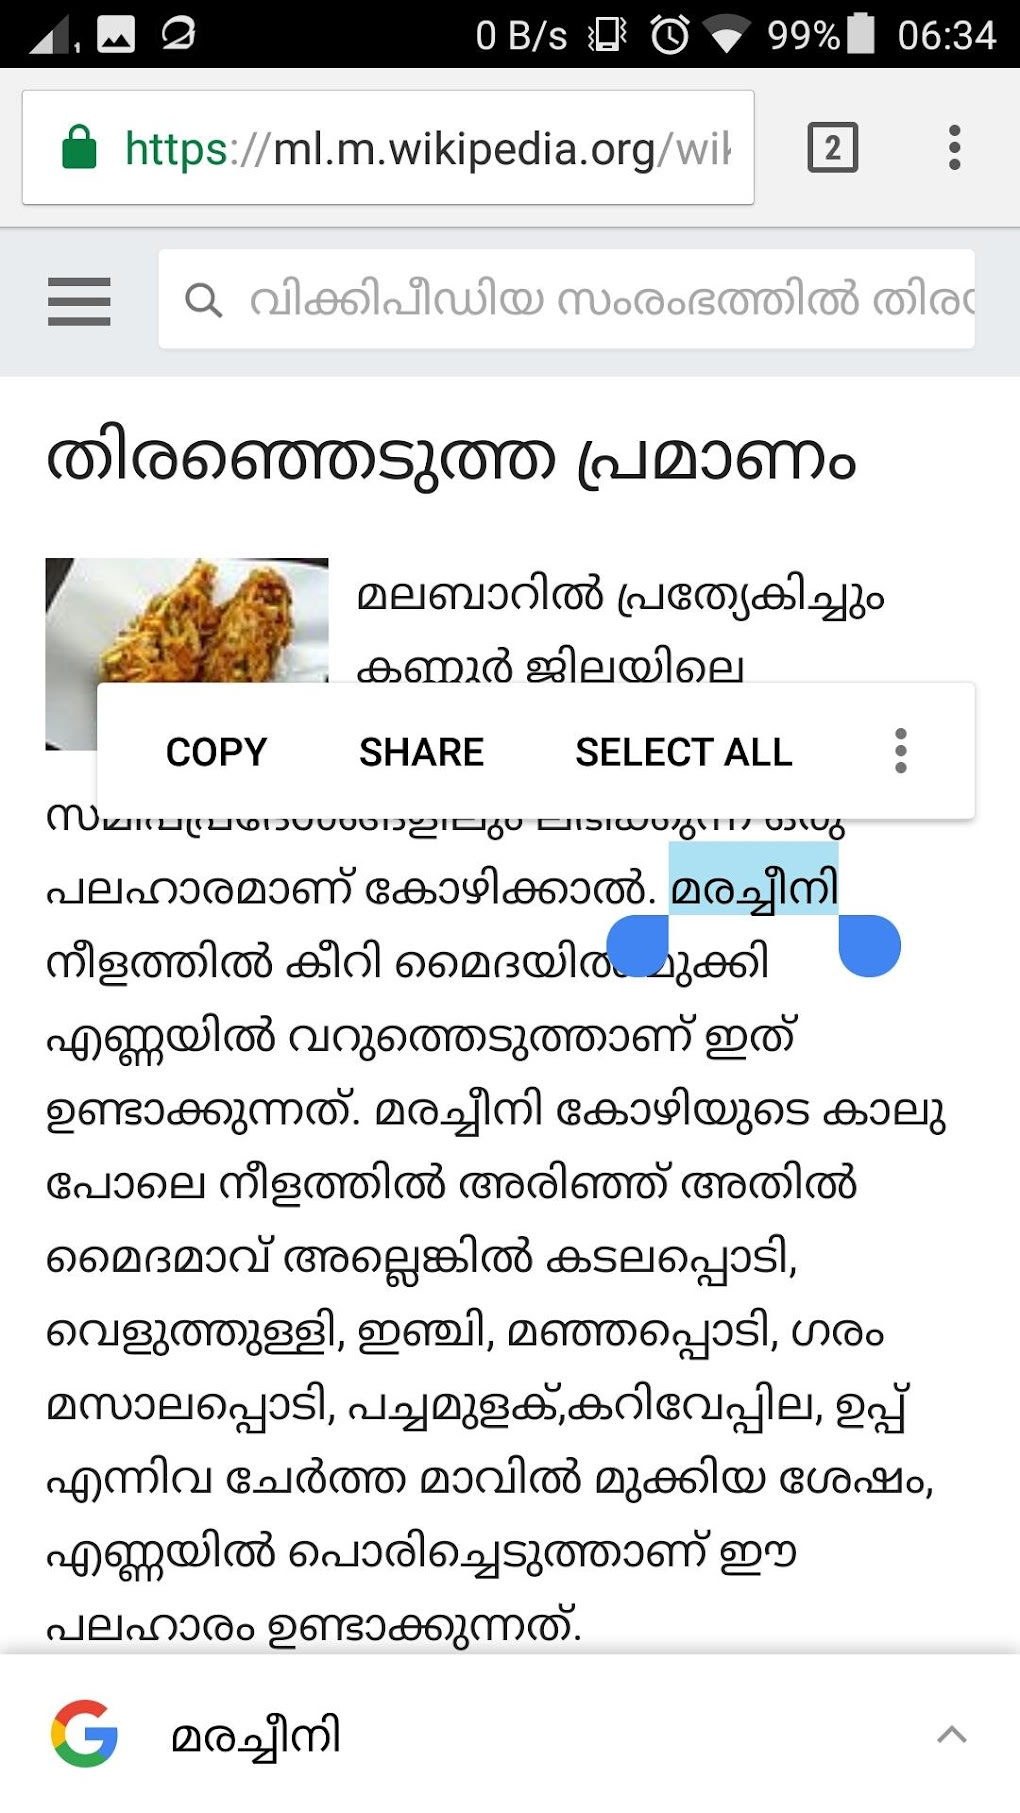 clutched Meaning in malayalam